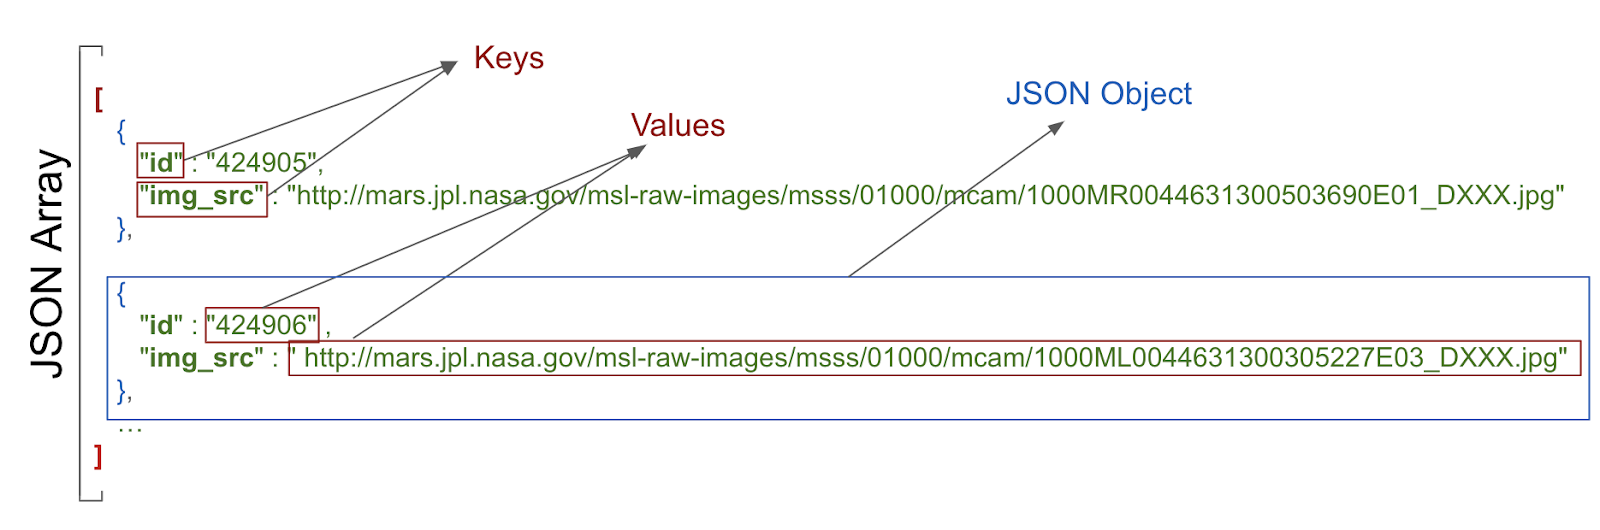 showing keys values and JSON object